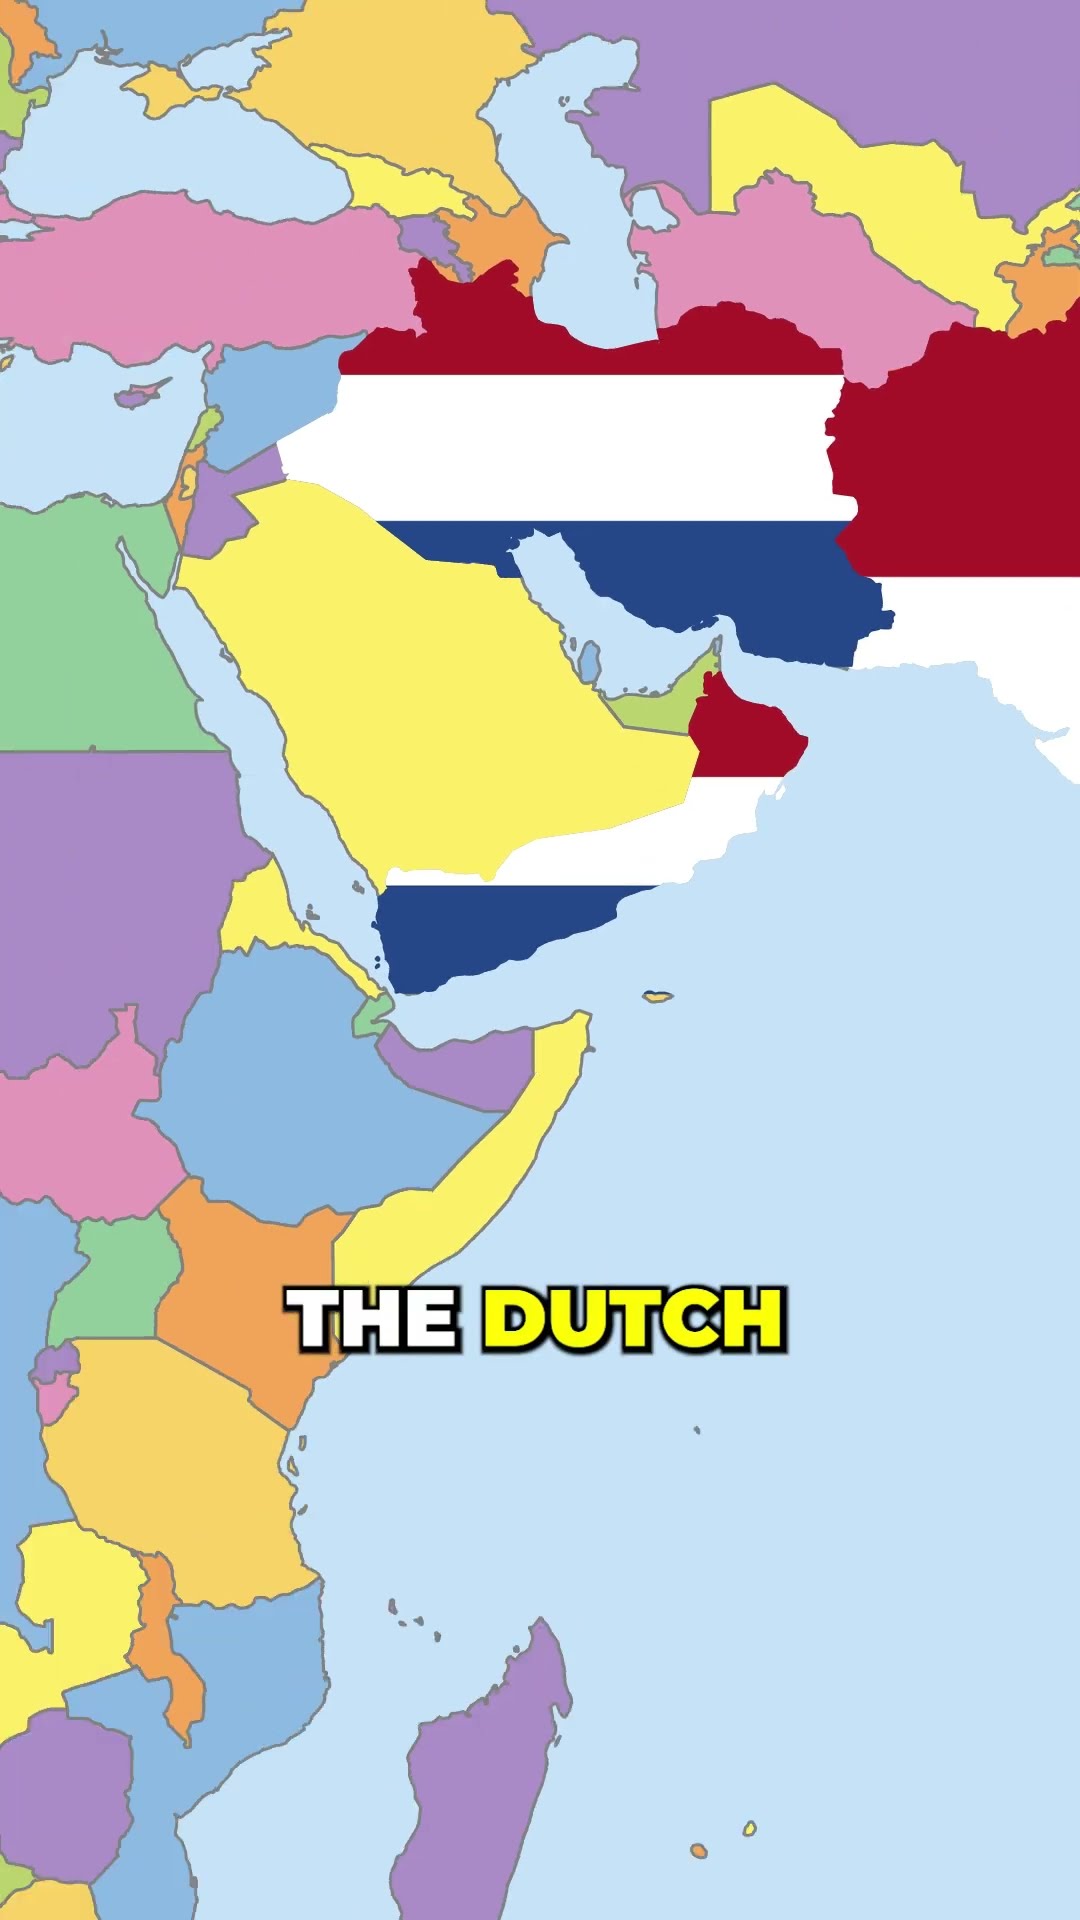 The Netherlands is a Giant City